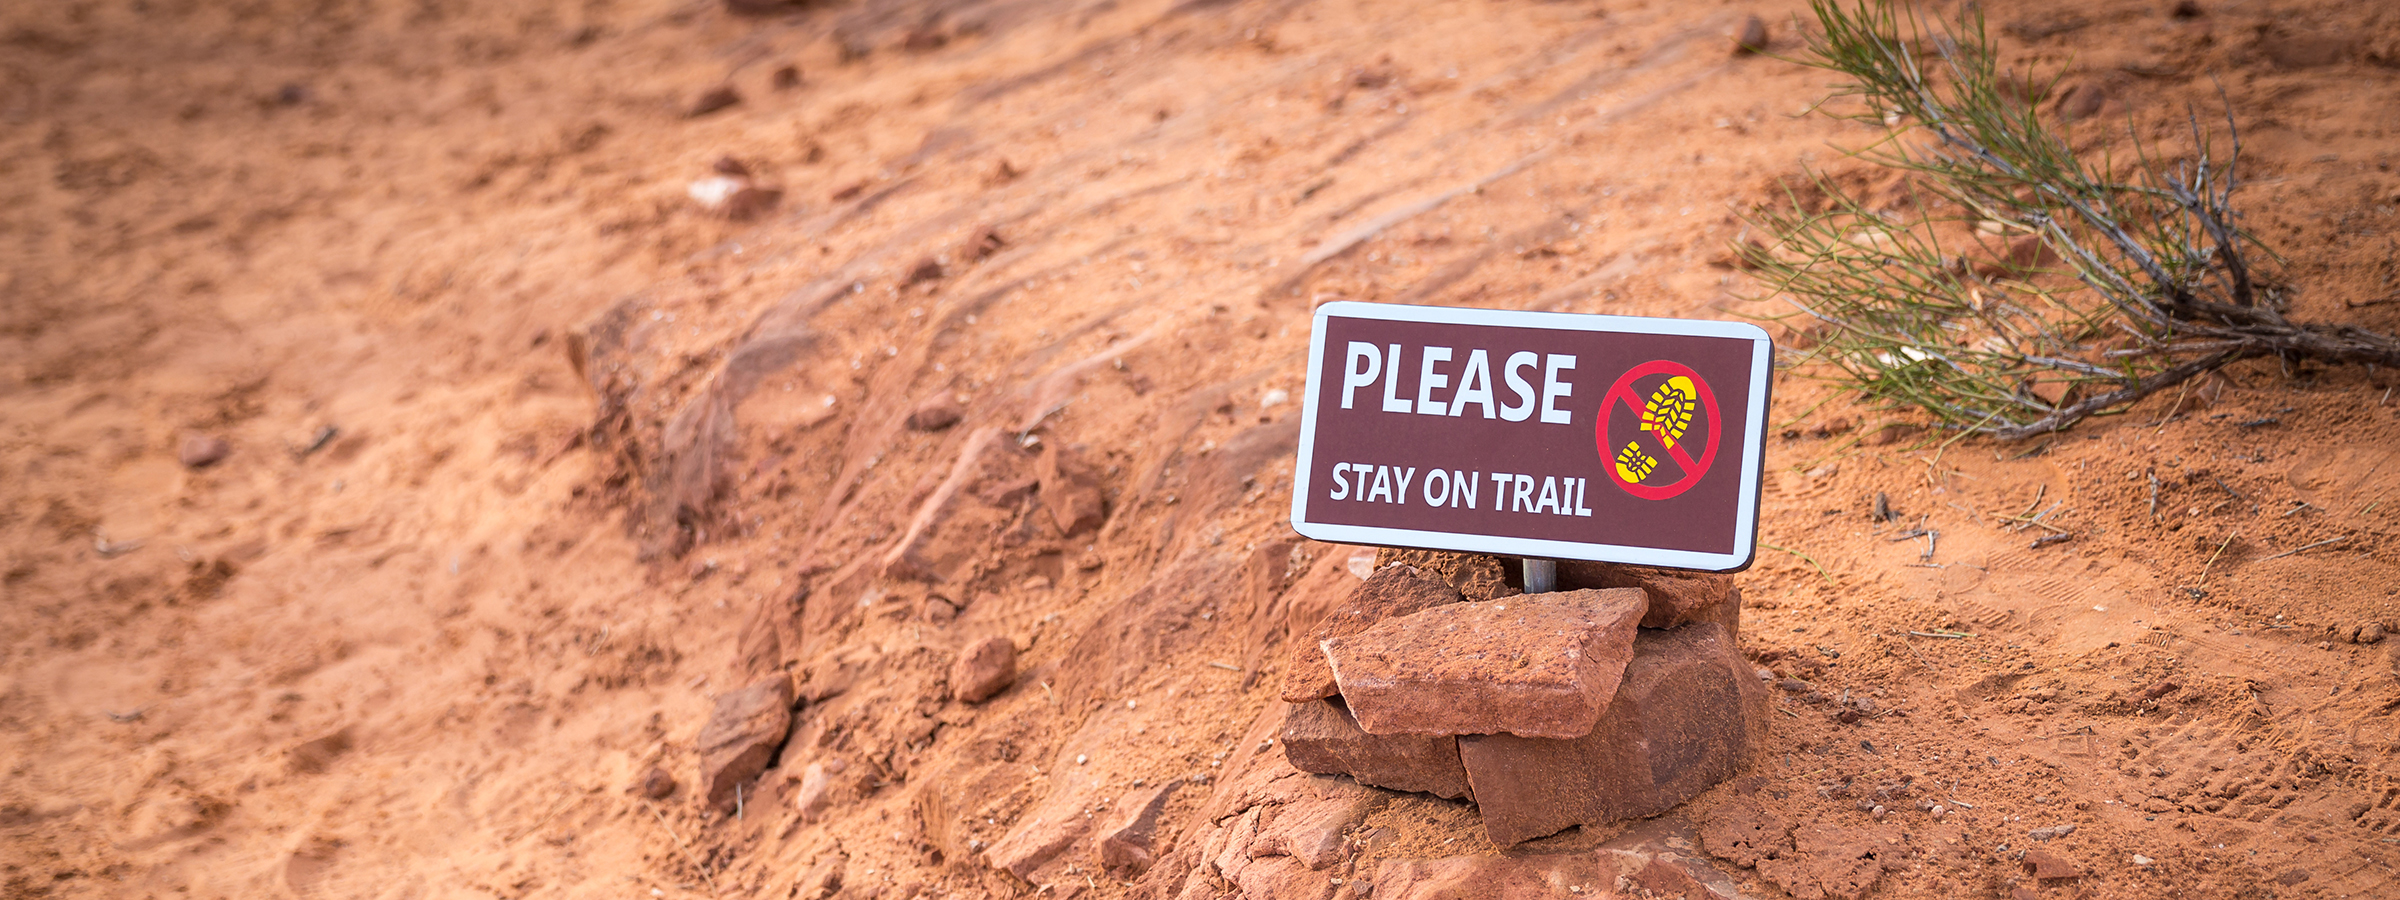 Stay on trail.